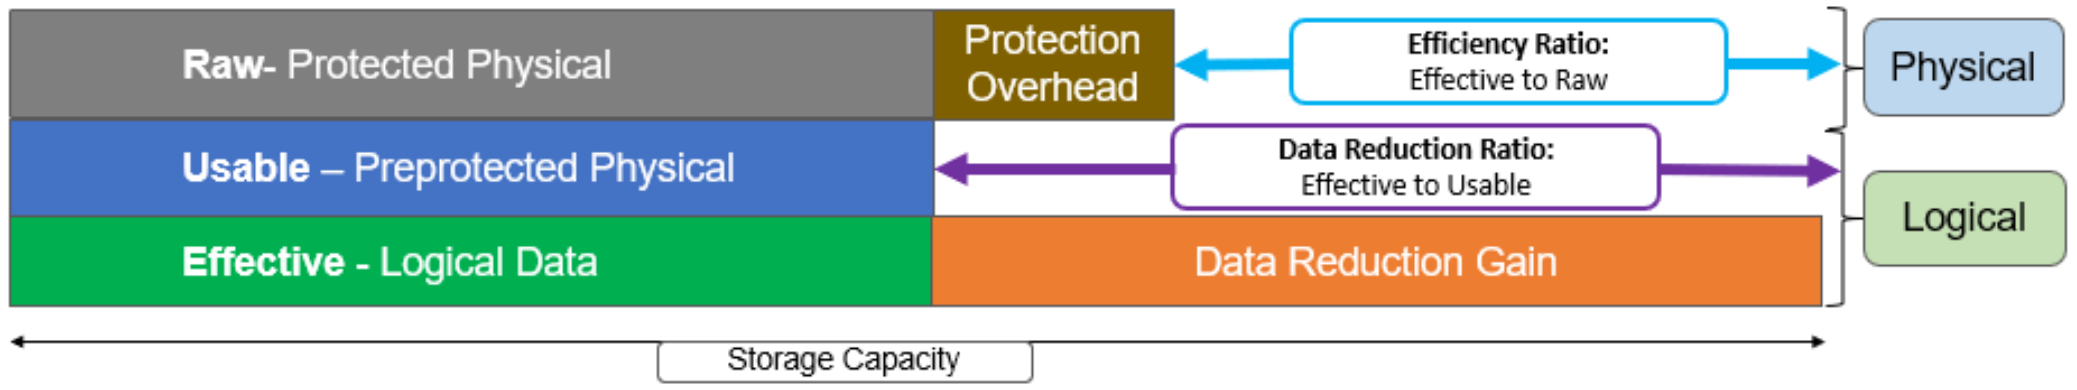 Graphic illustrating the interrelation of data capacity metrics and the corresponding efficiency and data reduction ratios.